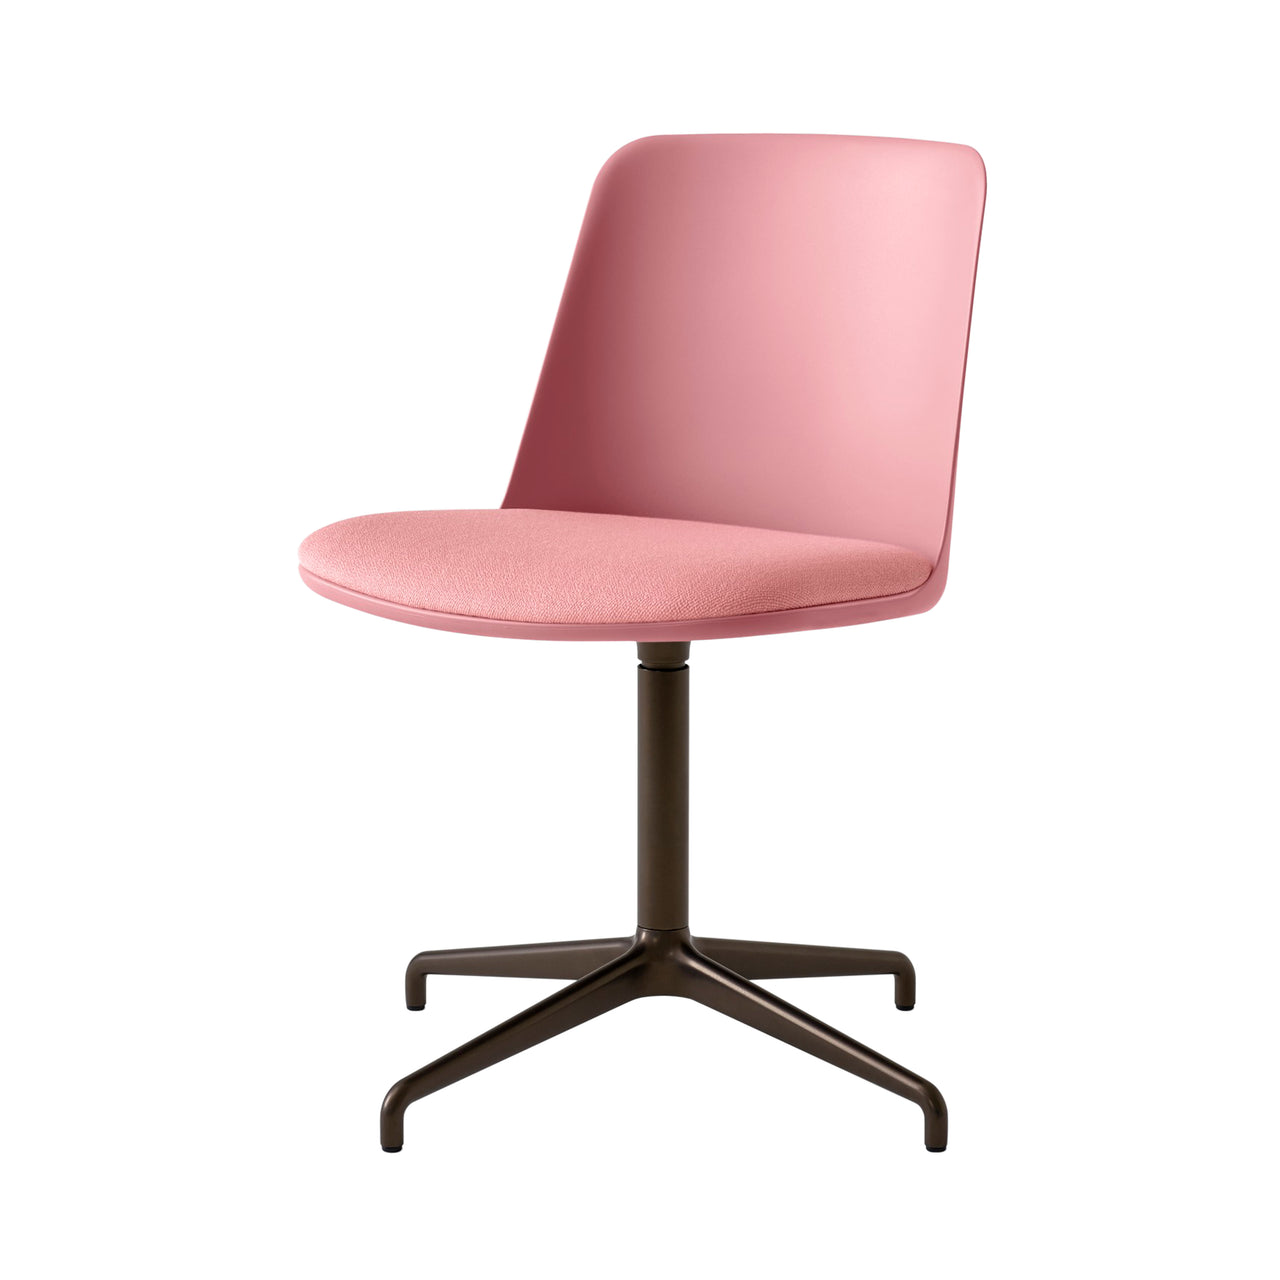 Rely Chair HW17: Soft Pink + Bronzed